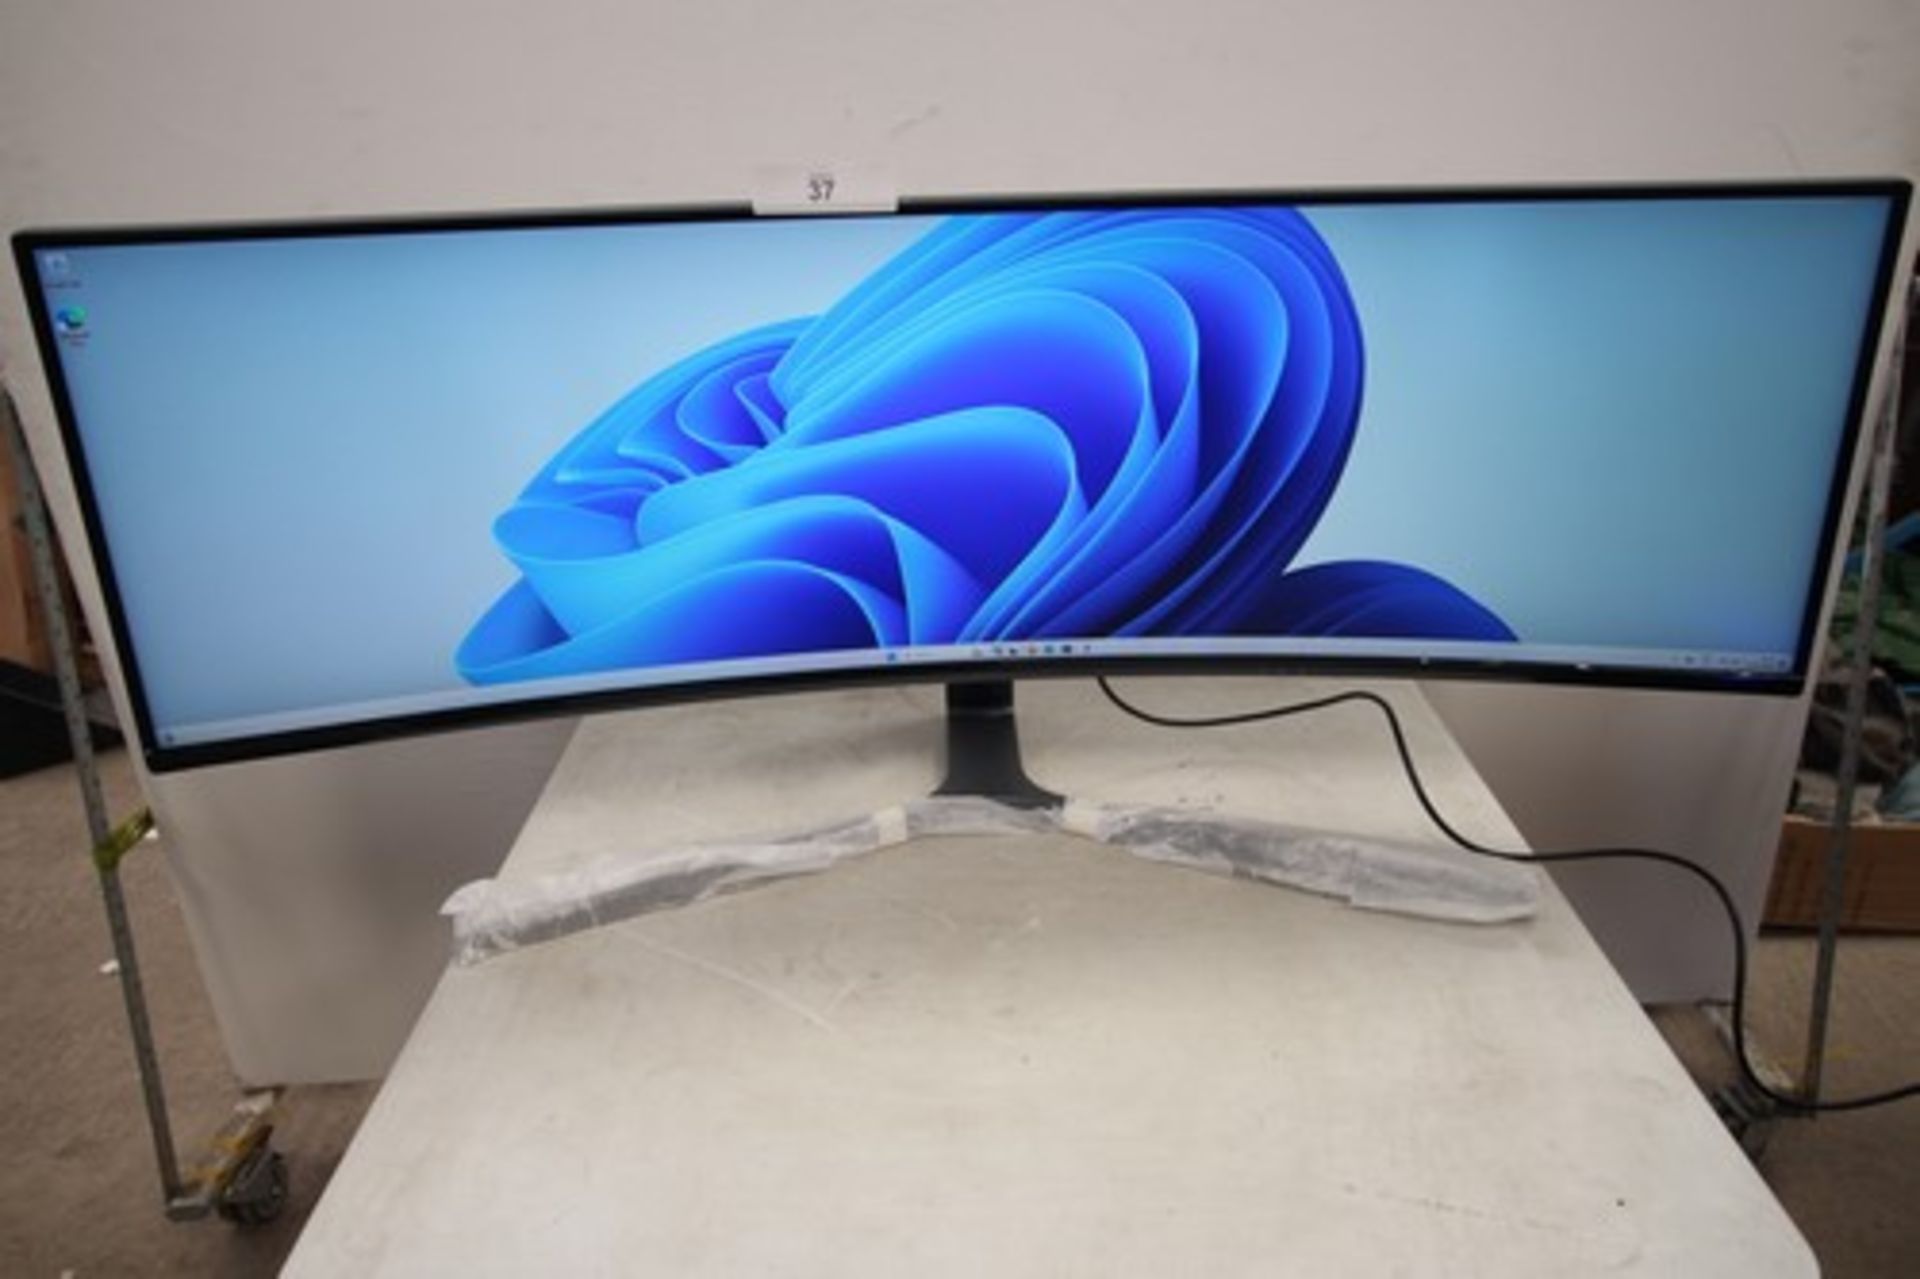 1 x Samsung Odyssey G9, 49" ultra wide gaming monitor, model: C49HG90DMR, powers on ok, not fully